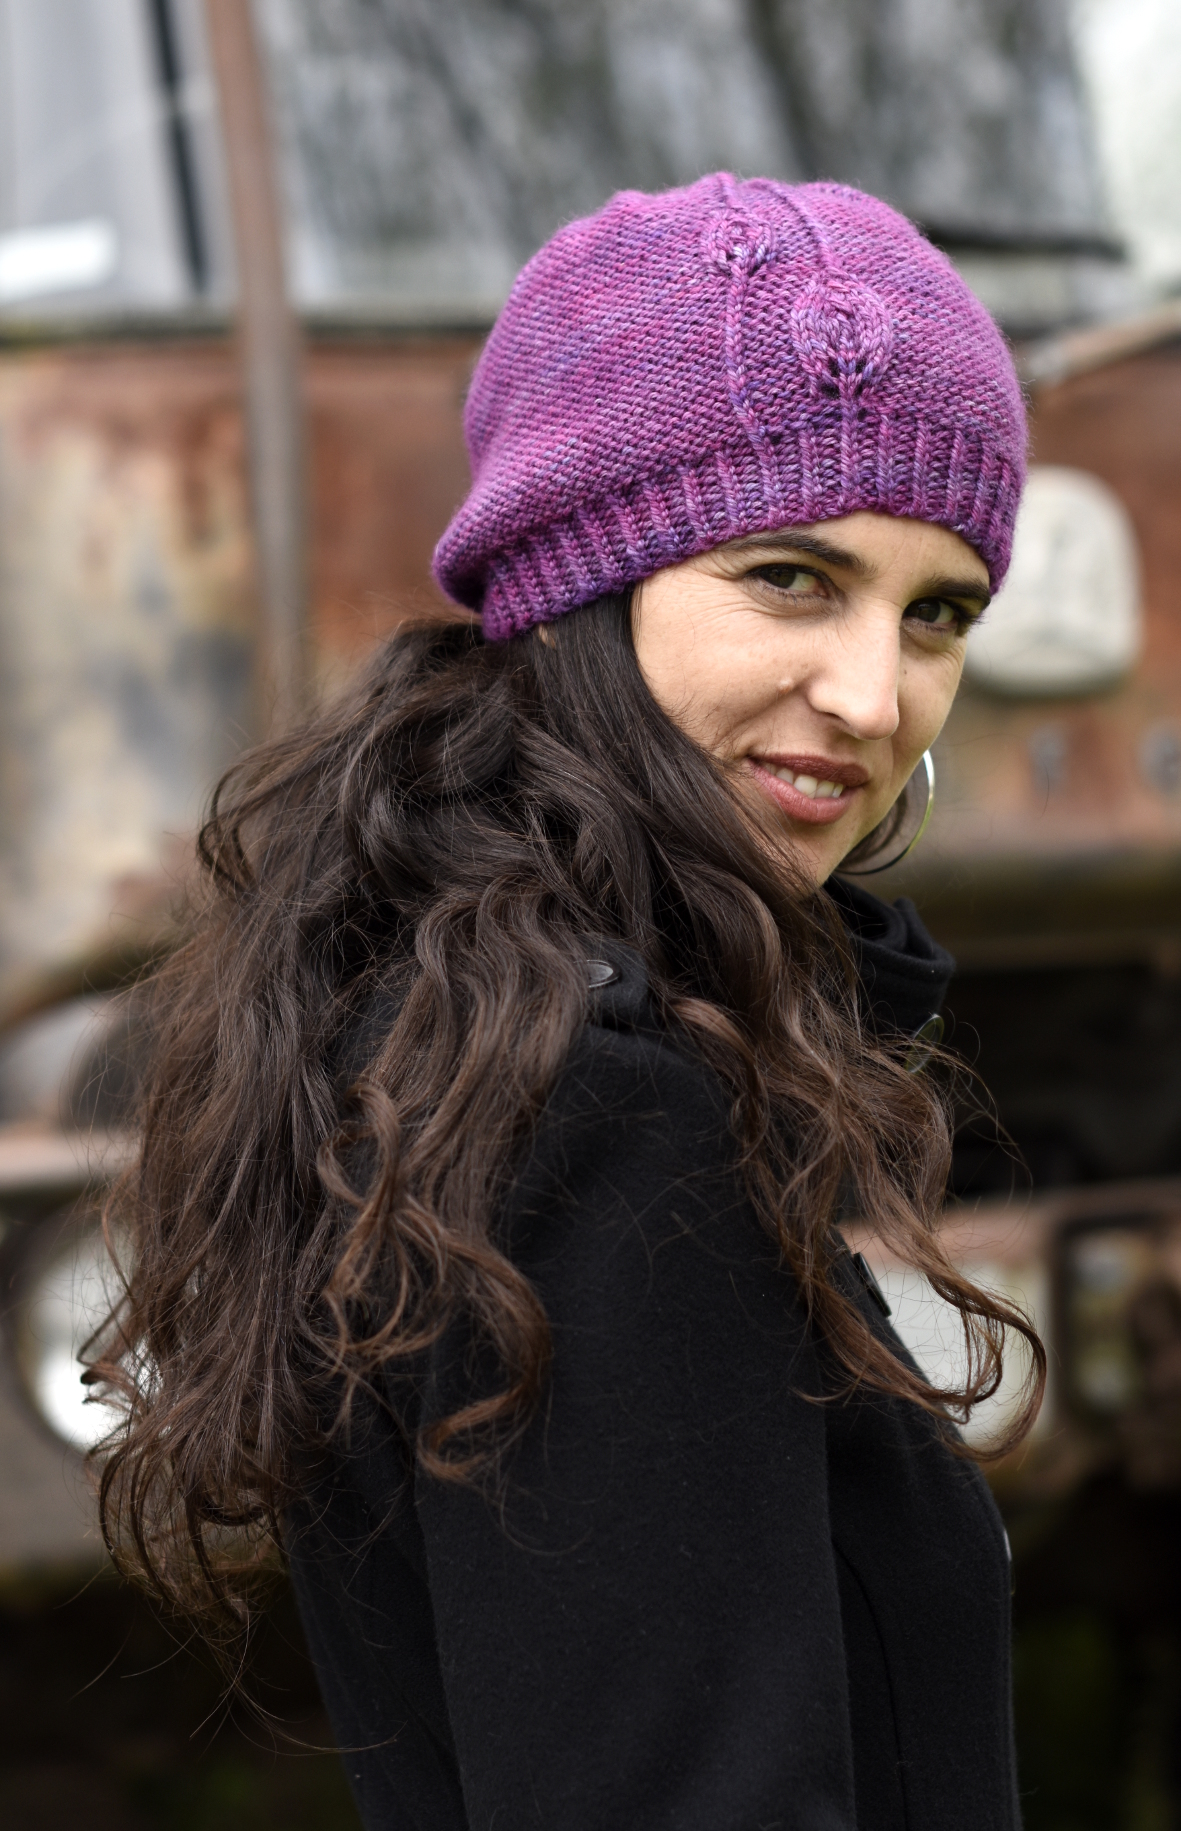 Fabales slouchy Hat knitting pattern with lace leaf detail